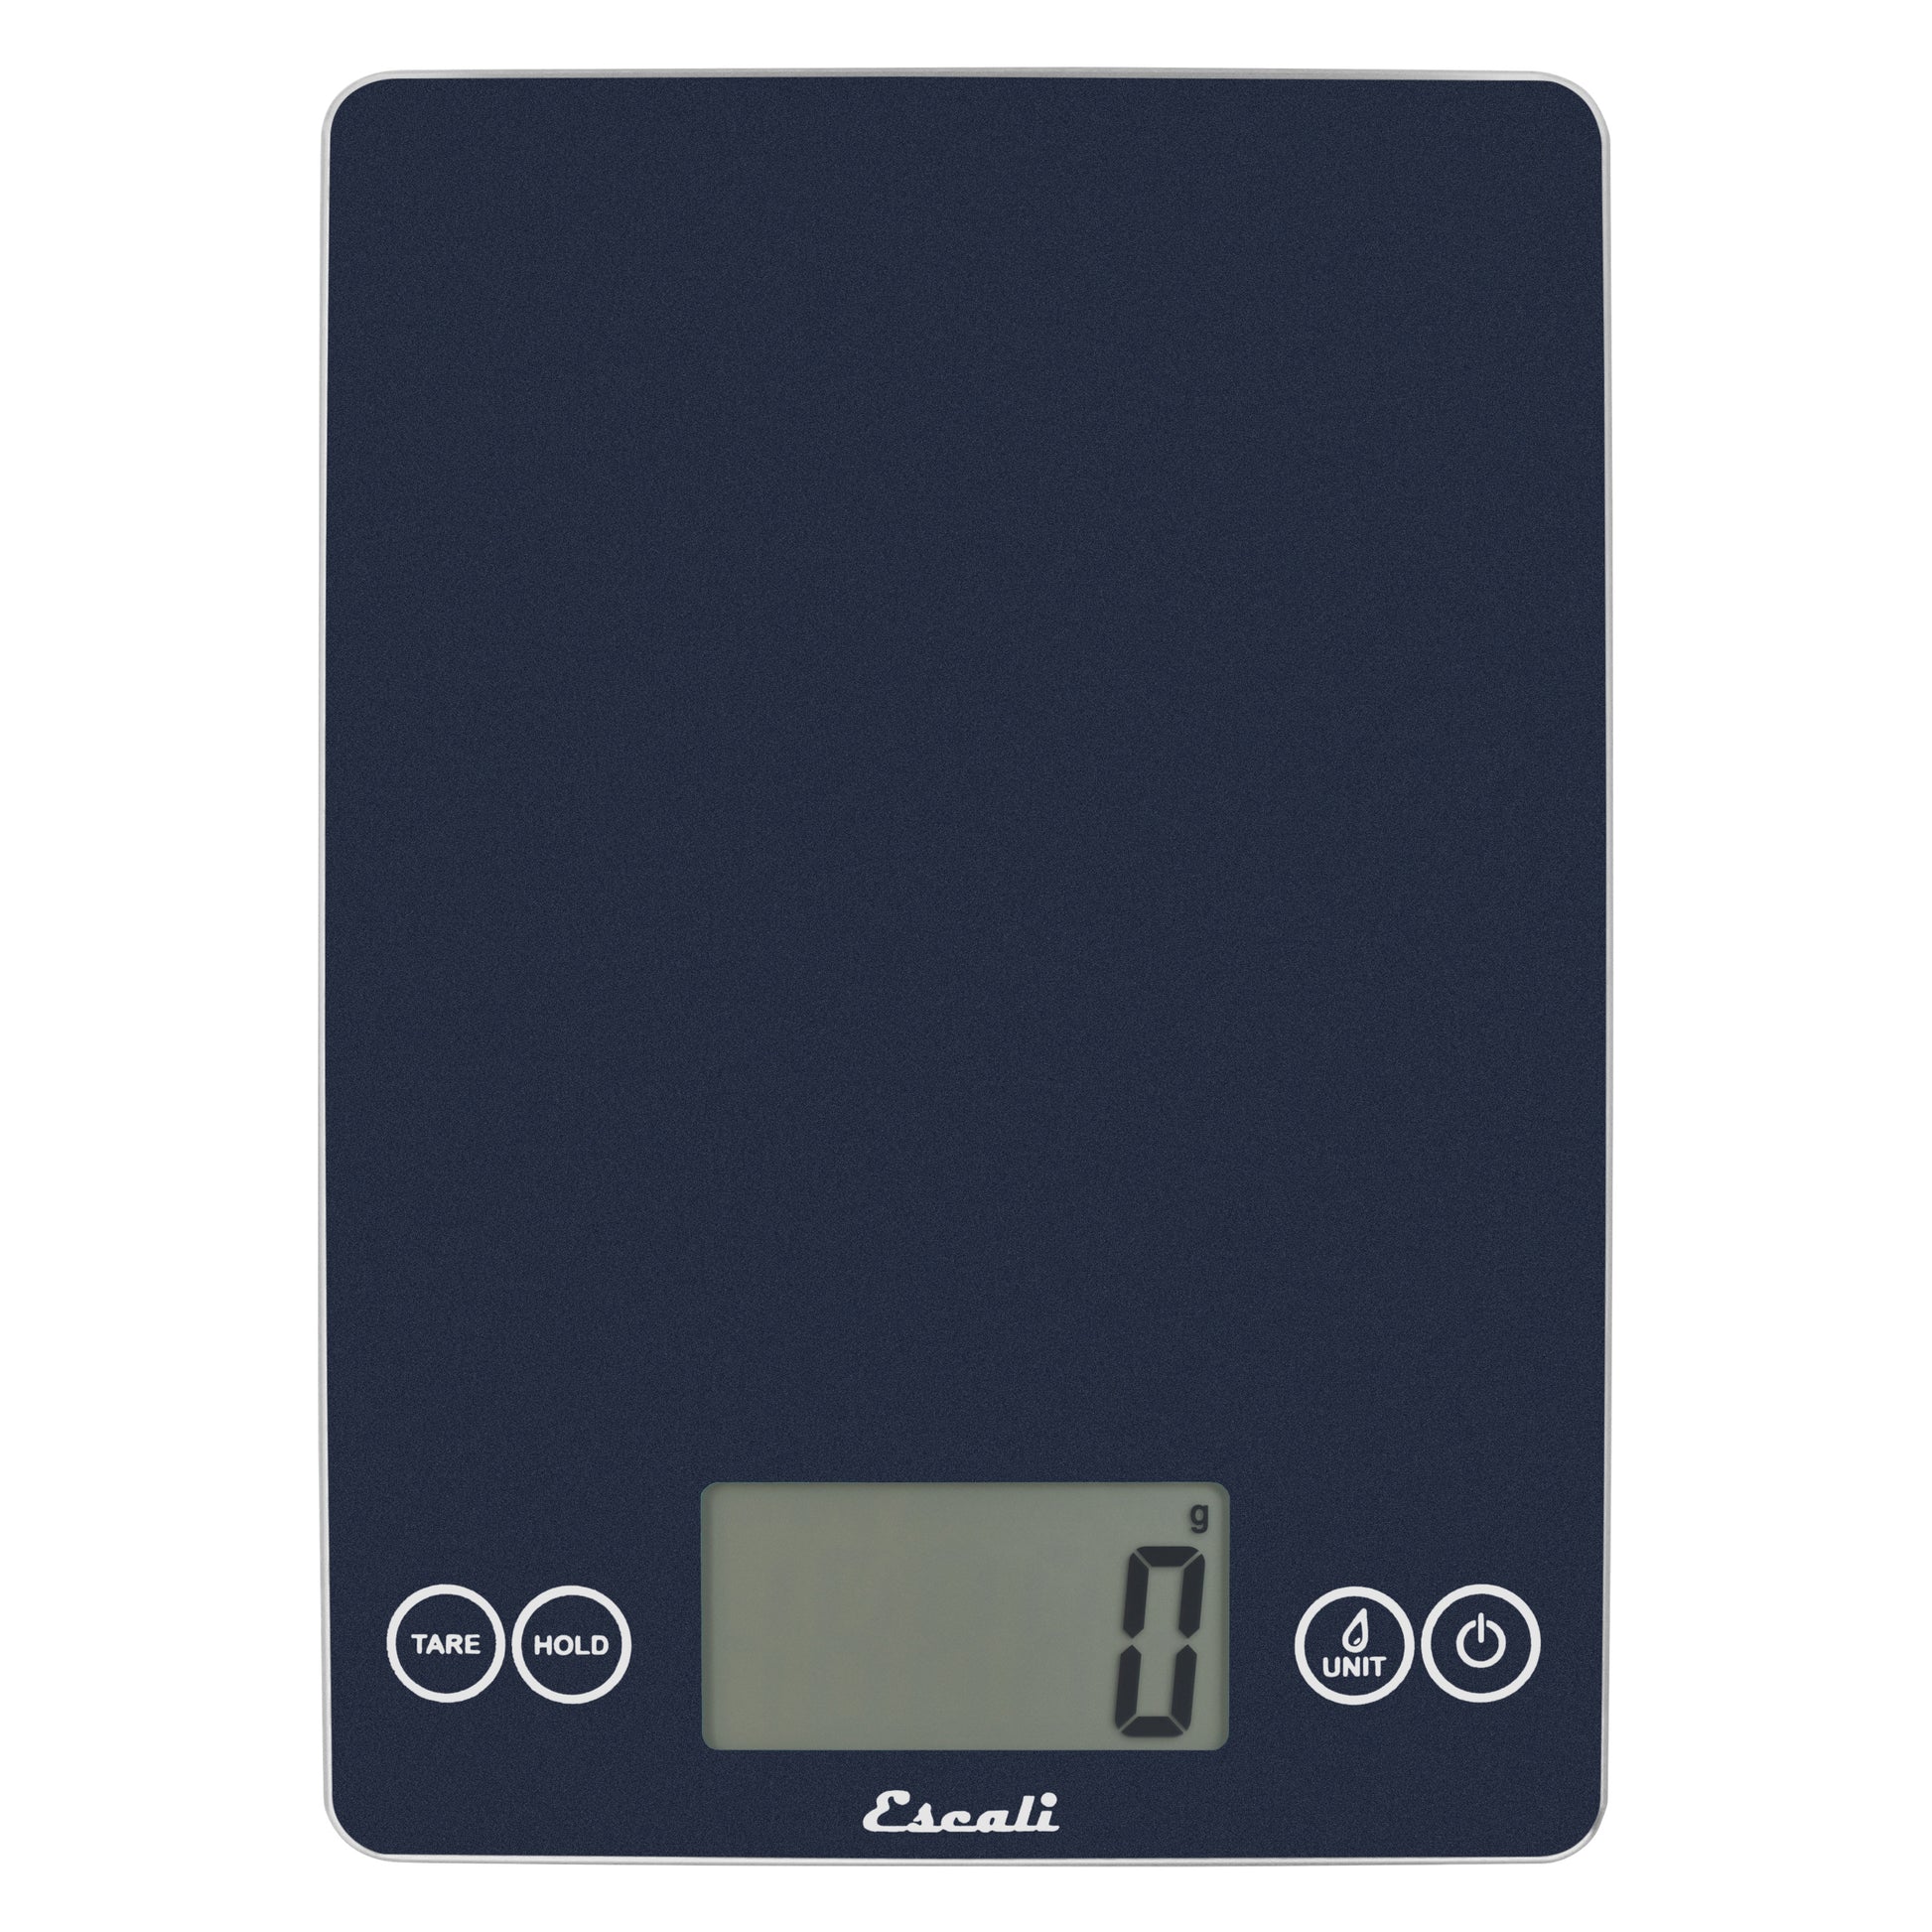 A photo of a blue mirage color ARTI Digital Kitchen Scale on a white background.